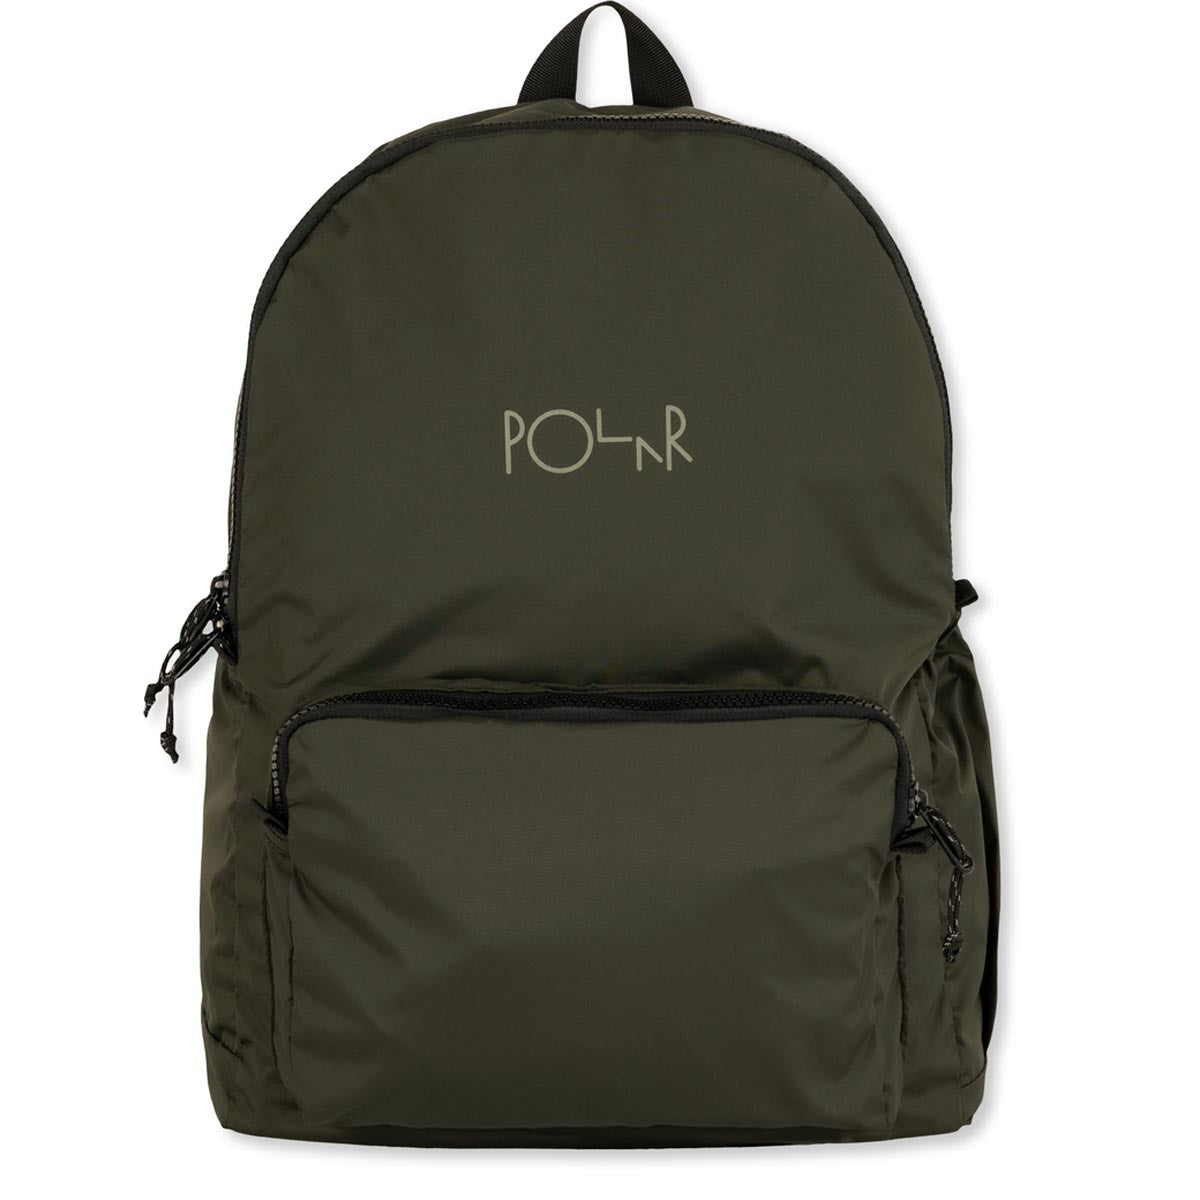 Polar Packable Backpack - Dirty Black image 1